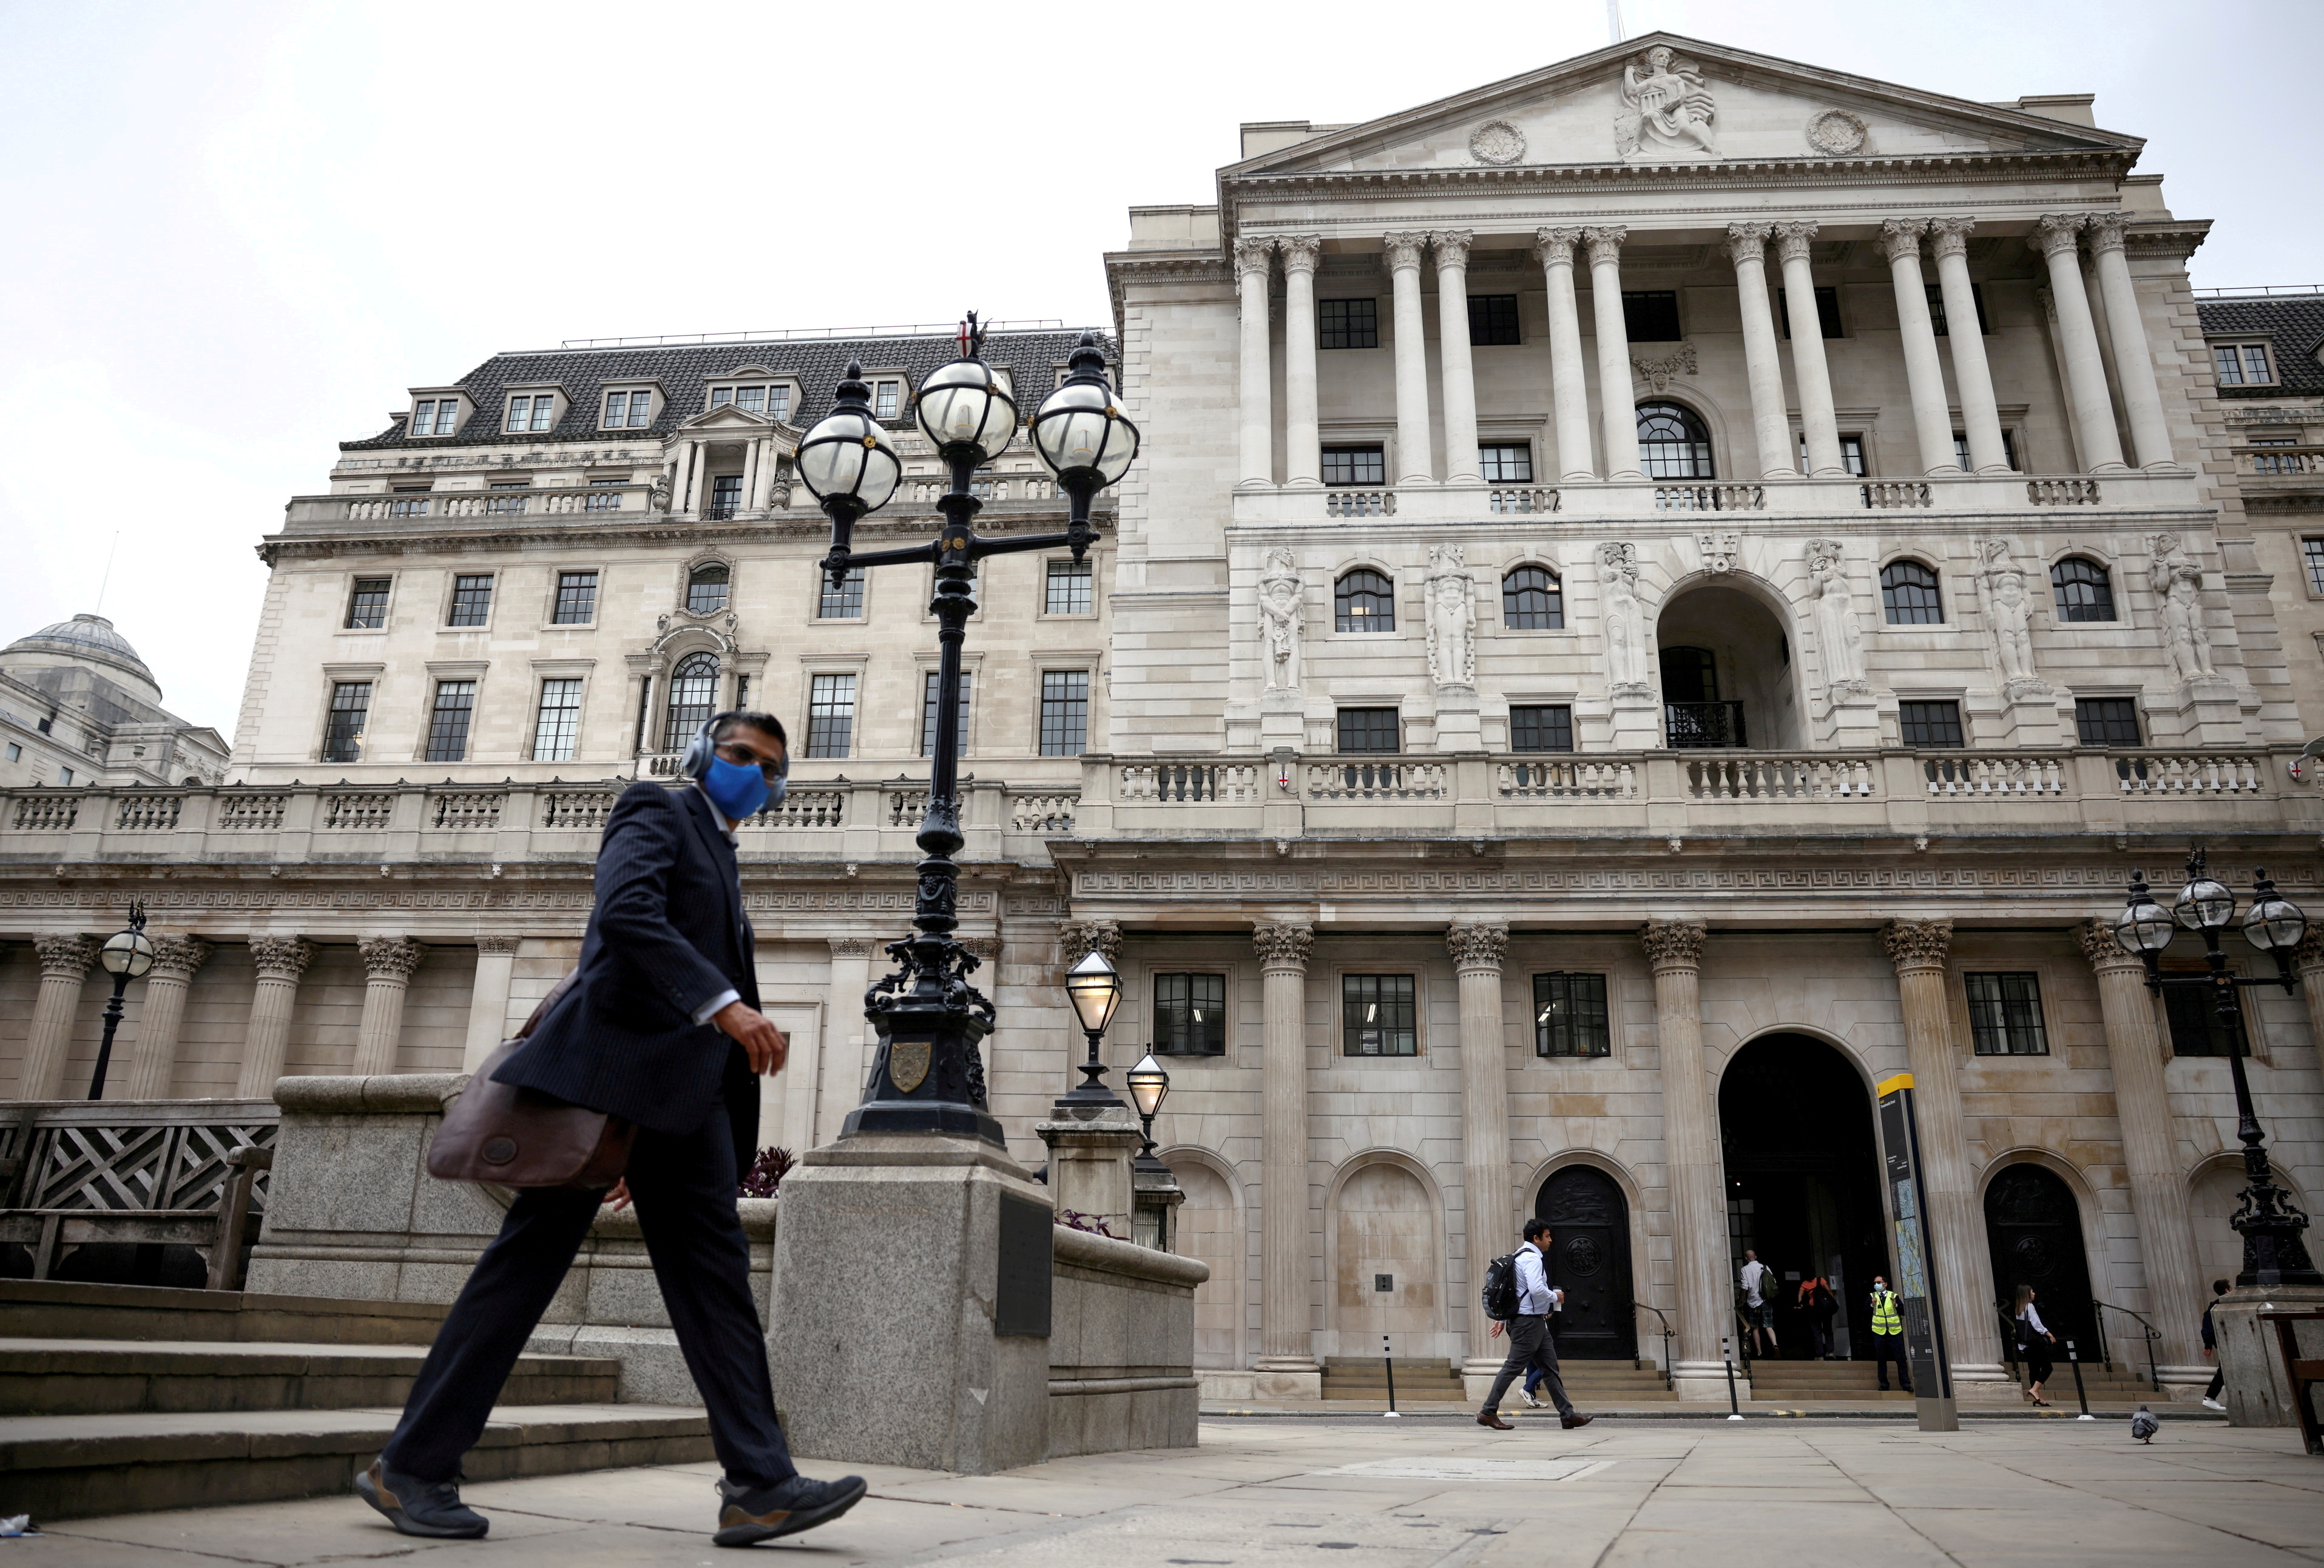 A person walks past the Bank of England in the City of London financial district, in London, Britain, June 11, 2021. REUTERS/Henry Nicholls/